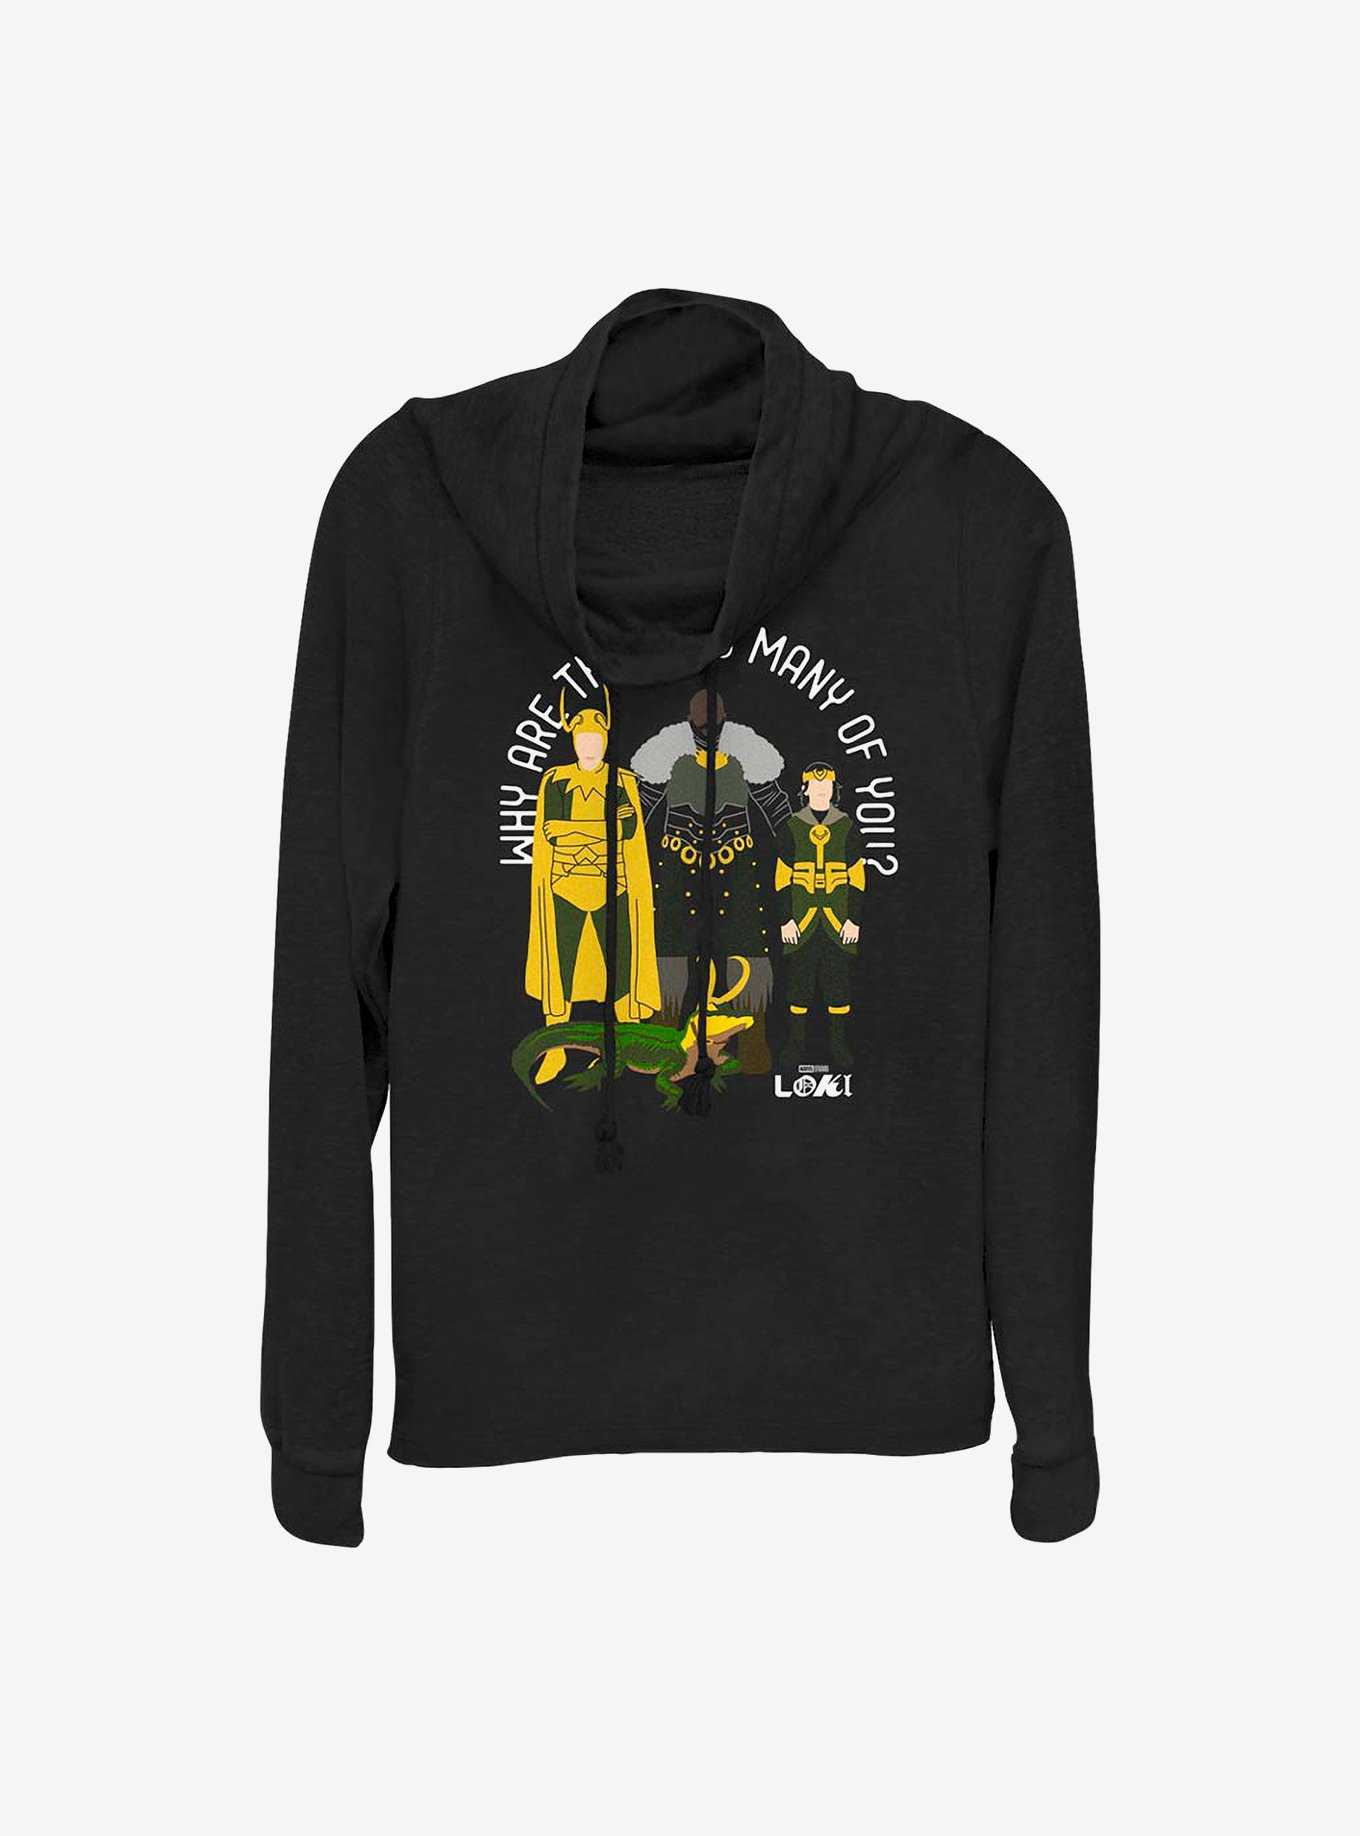 Marvel Loki Why Are There So Many Of You? Cowlneck Long-Sleeve Girls Top, , hi-res